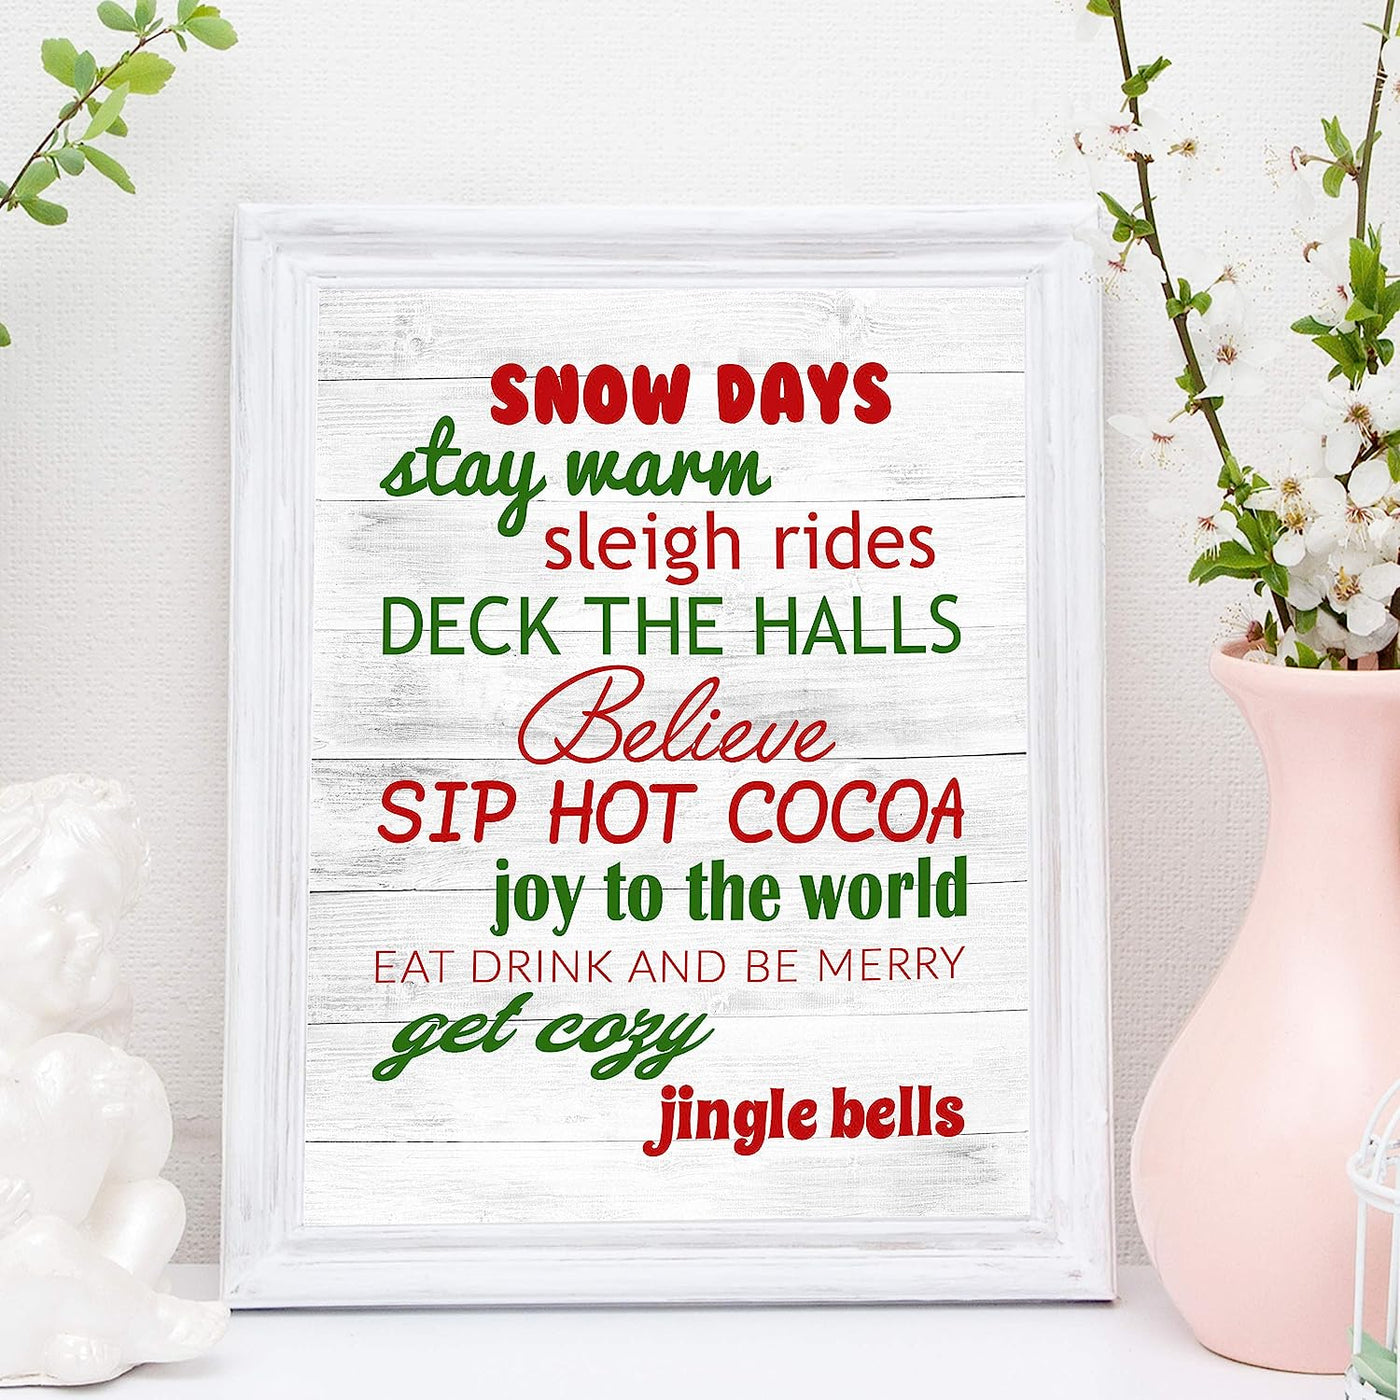 Snow Days-Sleigh Rides-Deck the Halls Rustic Holiday Sign-11 x 14" Festive Christmas Wall Art Print w/Replica Wood Design-Ready to Frame. Typographic Home-Farmhouse-Welcome Decor. Printed on Paper.